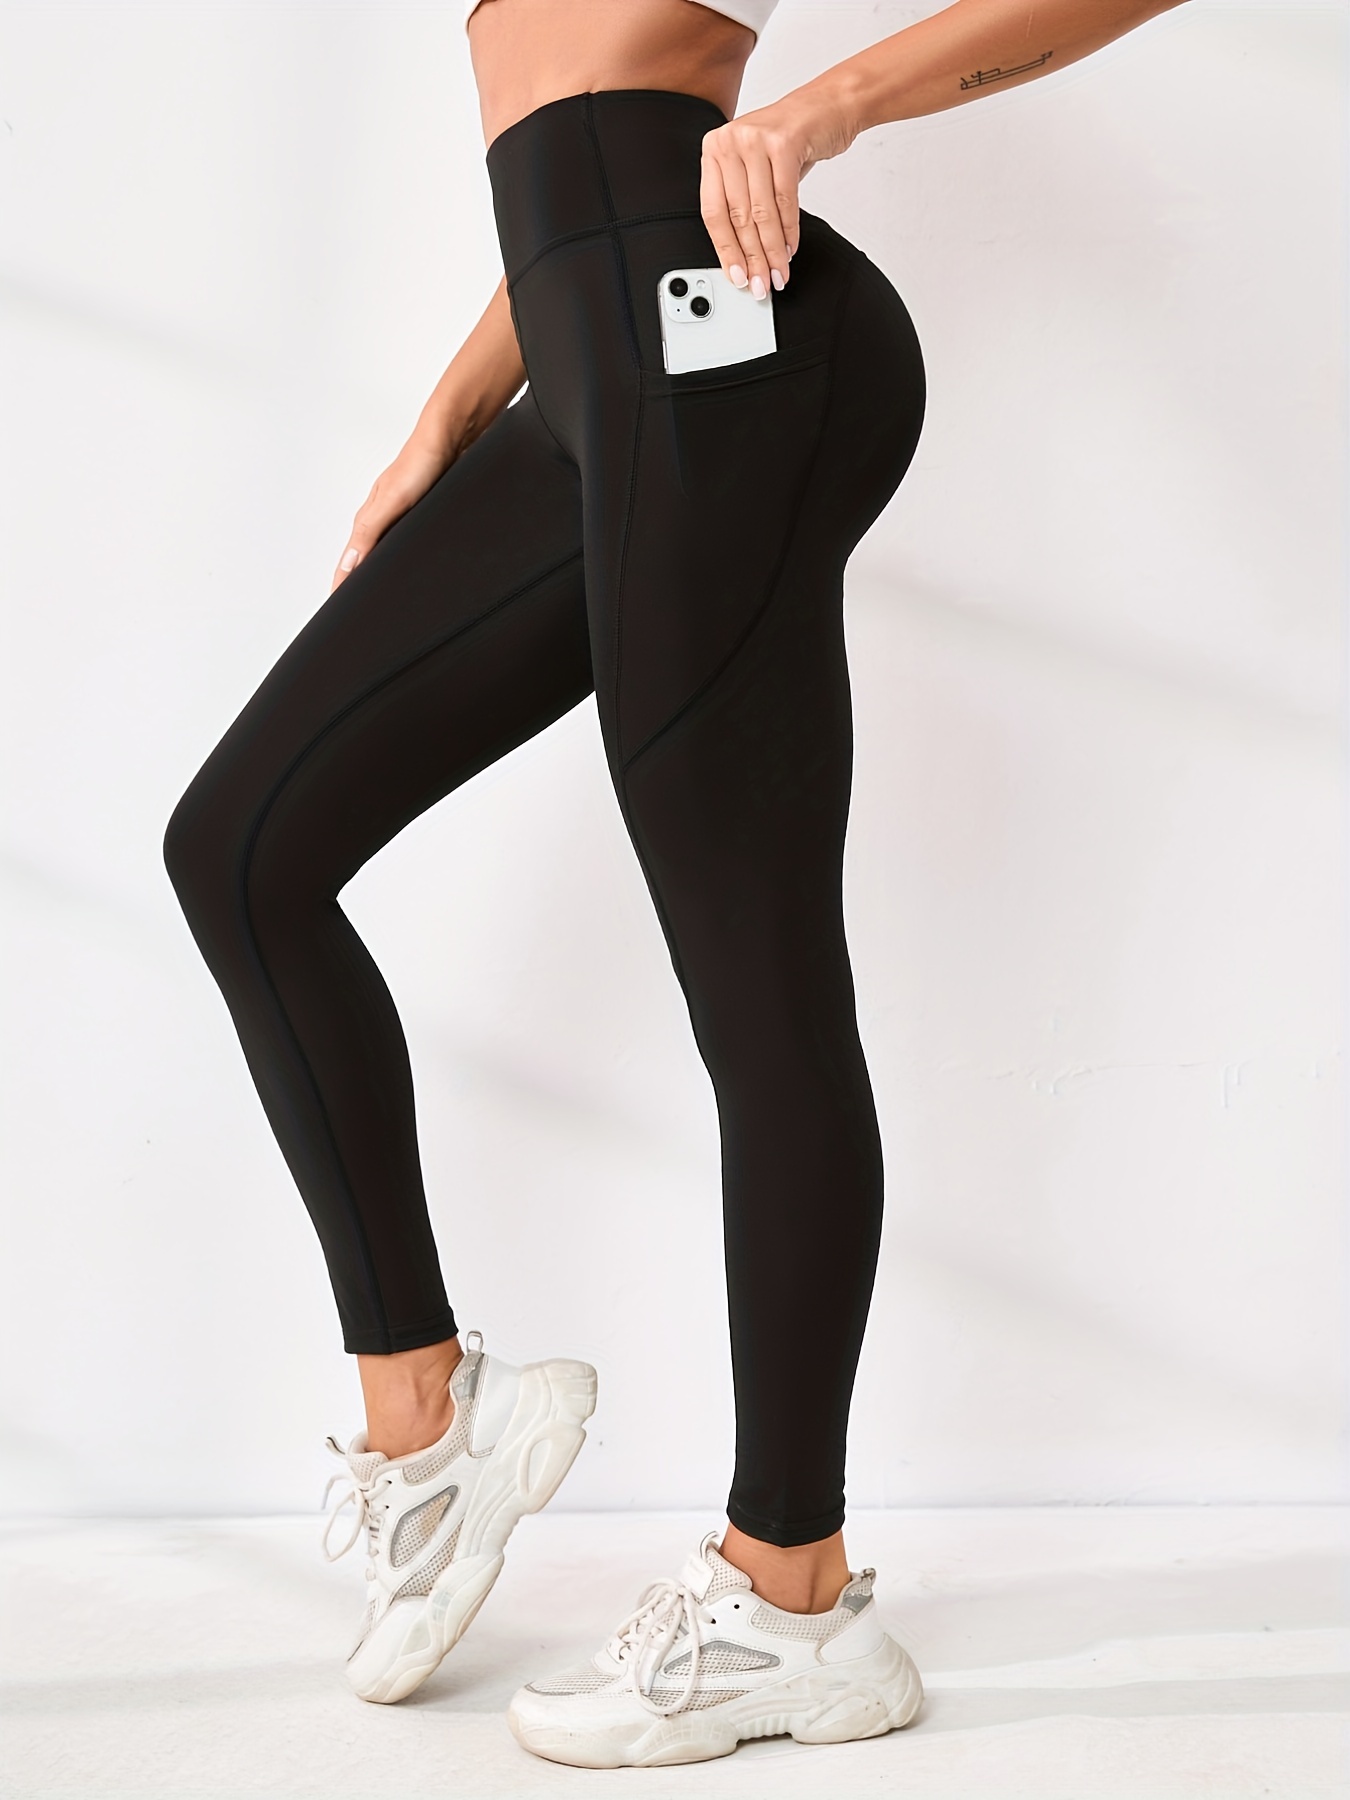  Leggings for Women with Pockets,High Waisted Butt